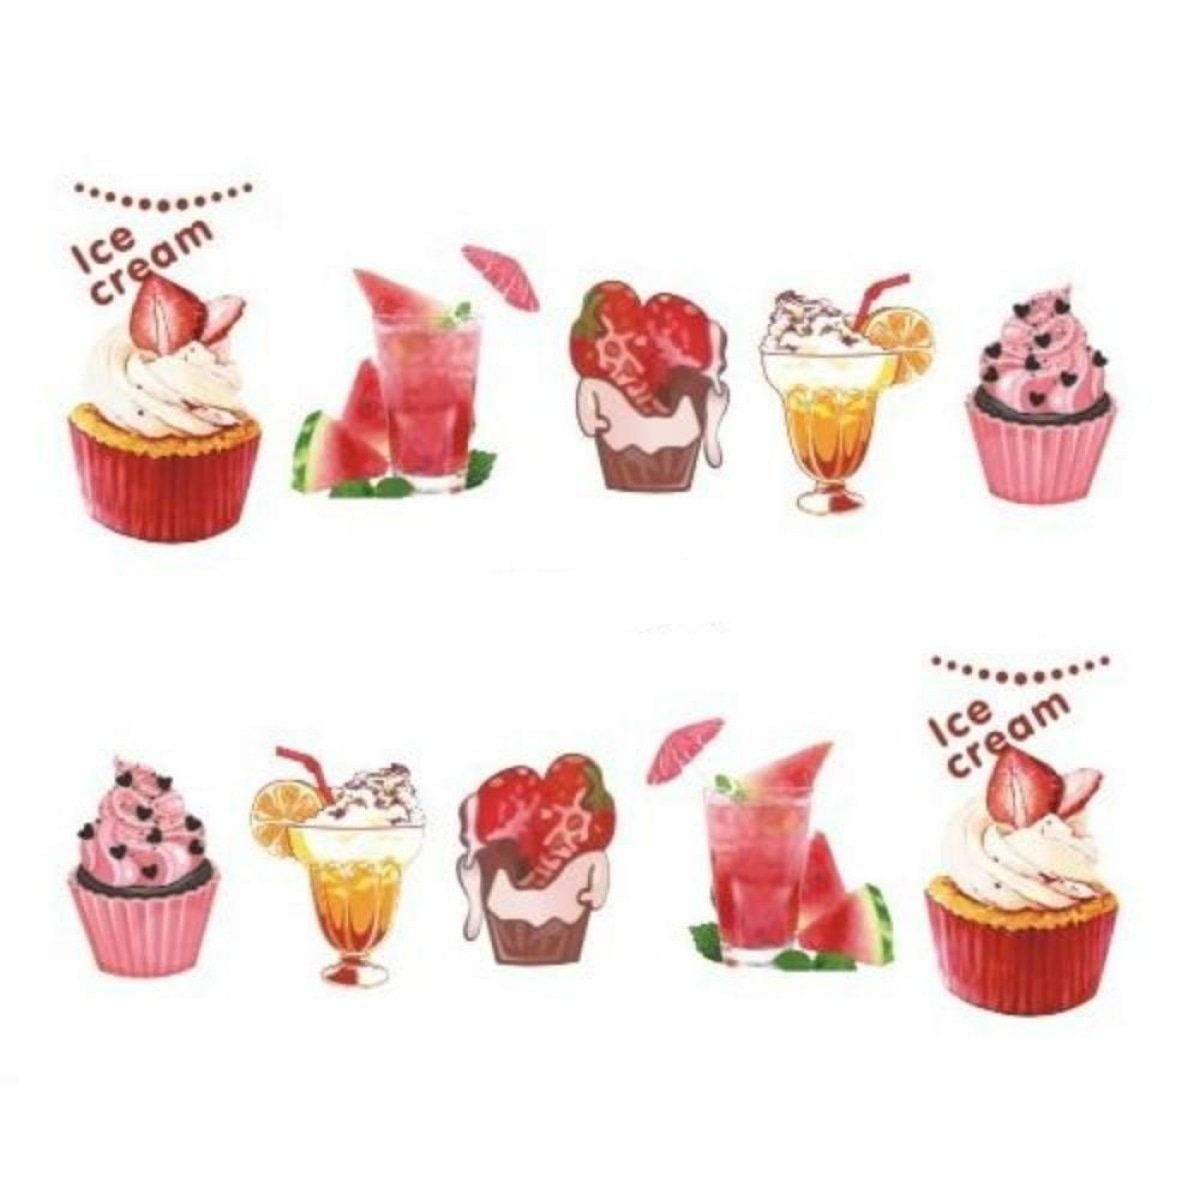 Strawberry Summer Cake & Fruit Stickers For Nails Nail Manicure Art - Stz-474 Sheet